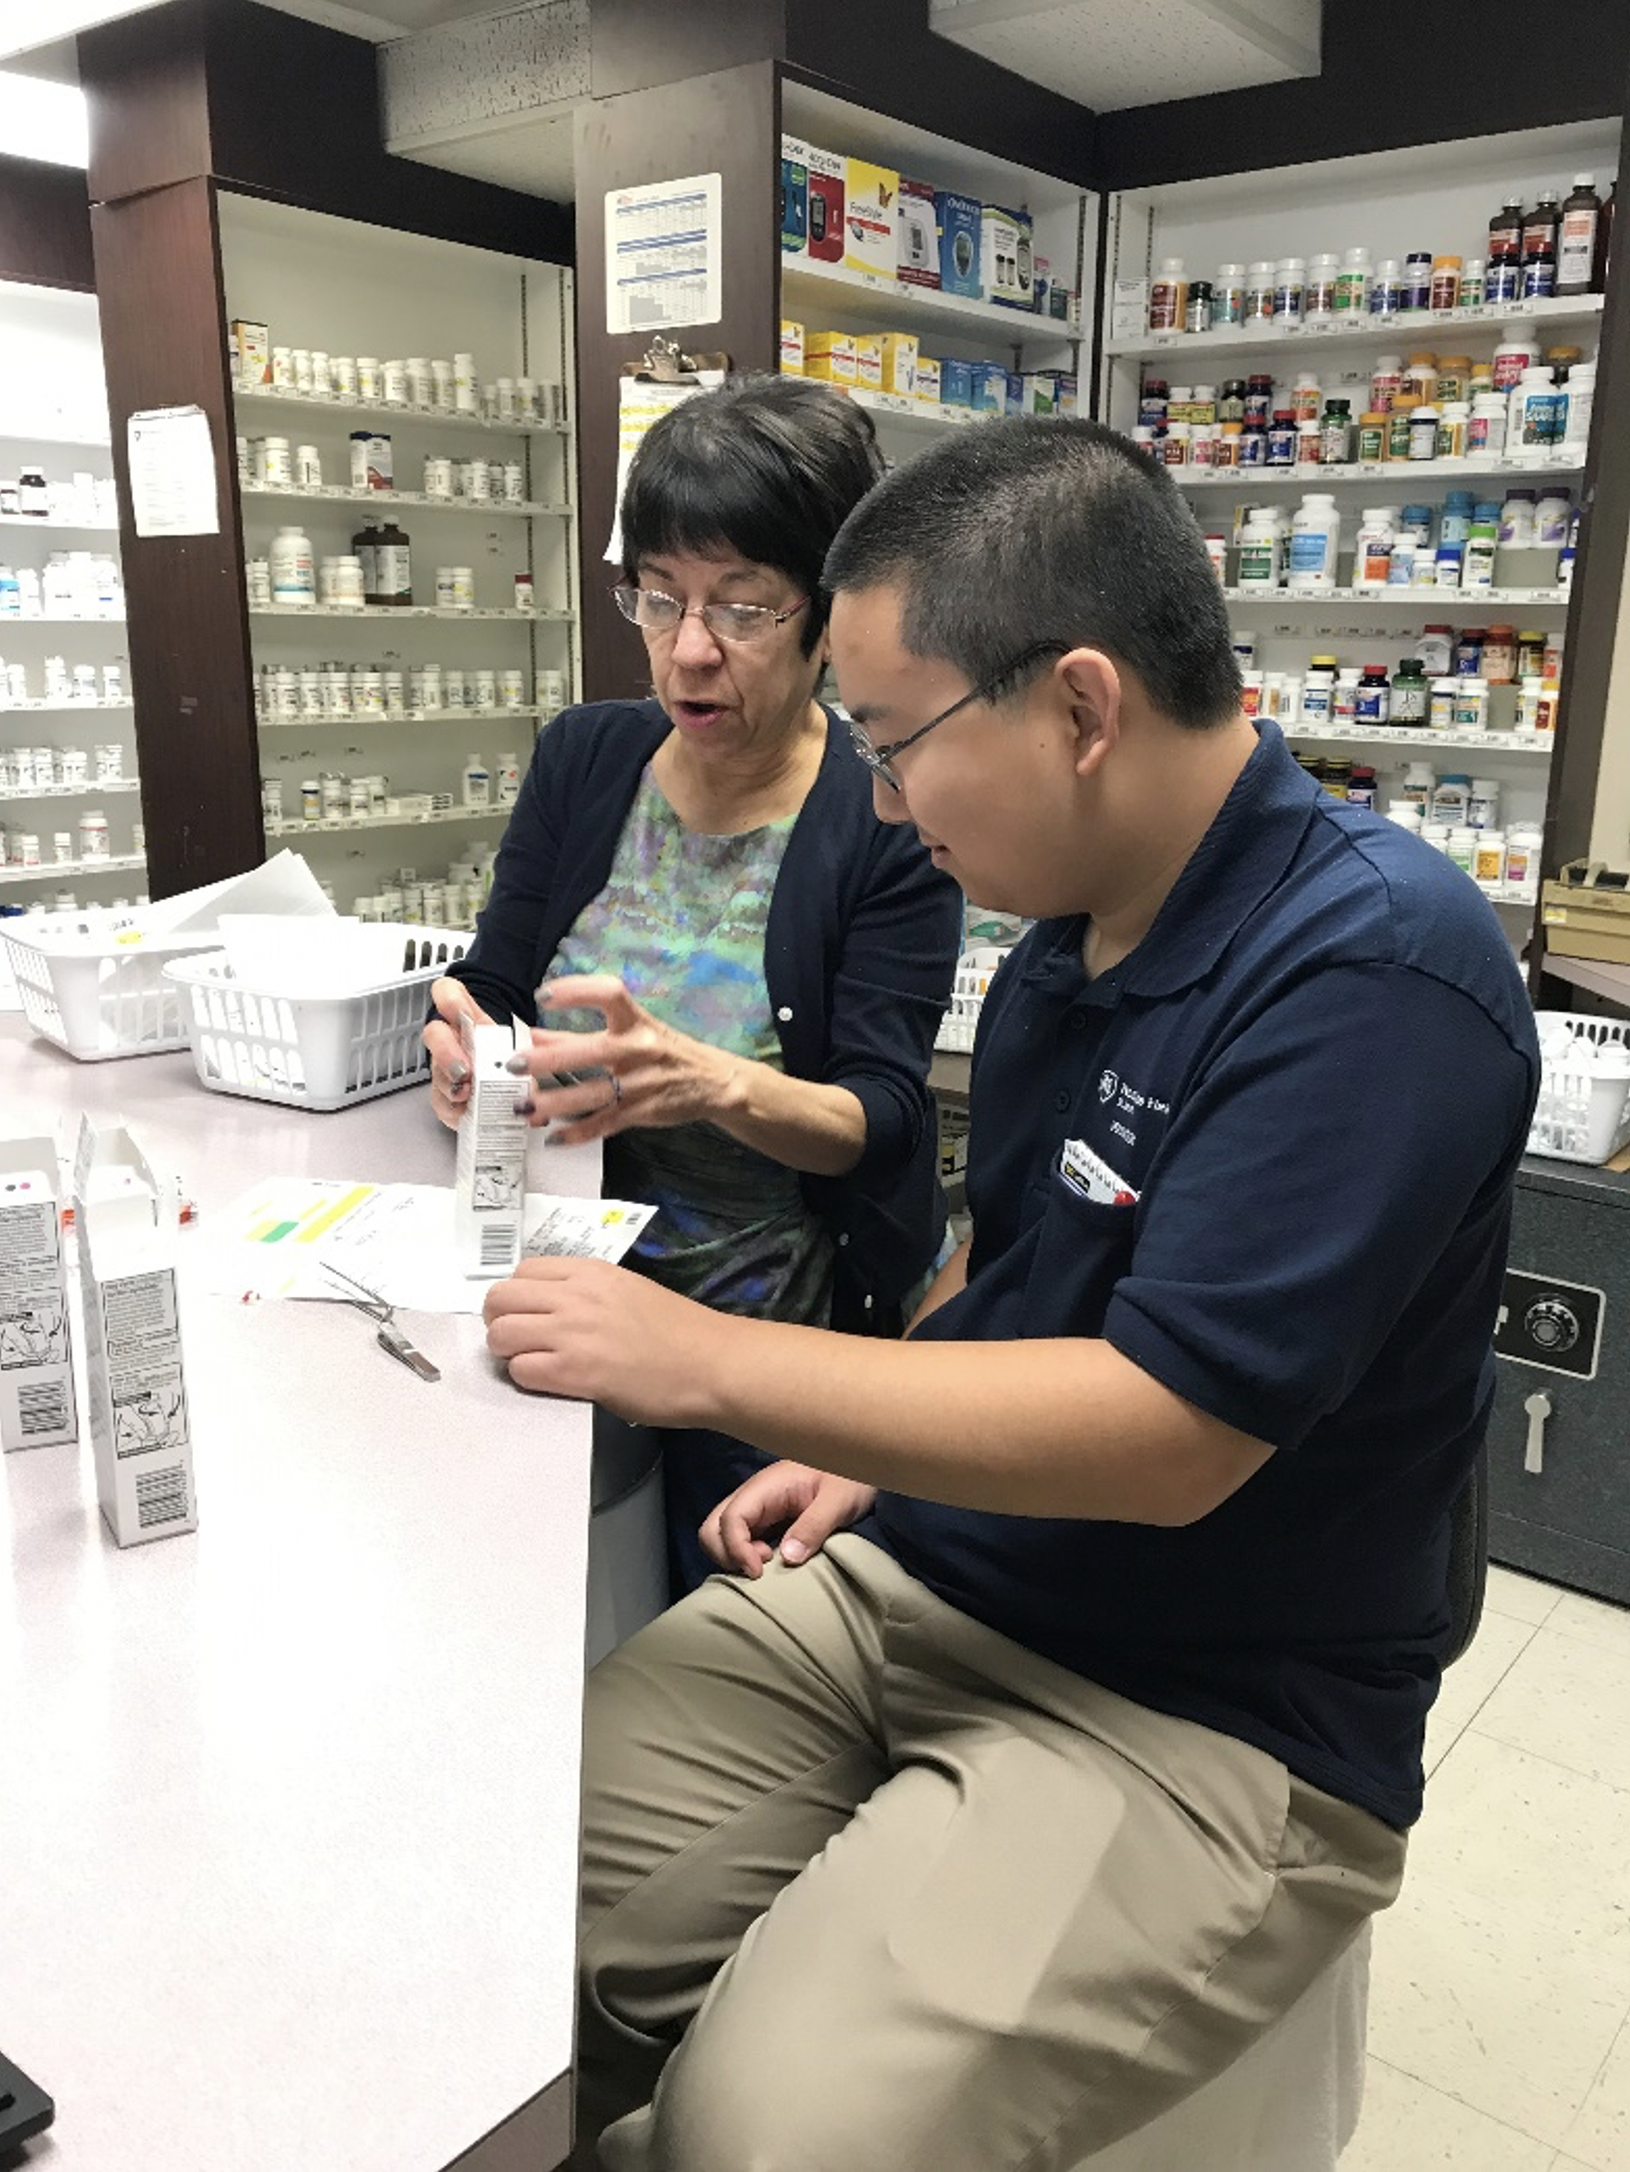 A Project SEARCH intern and his supervisor sit at a pharmacy counter as she shows him a prescription box